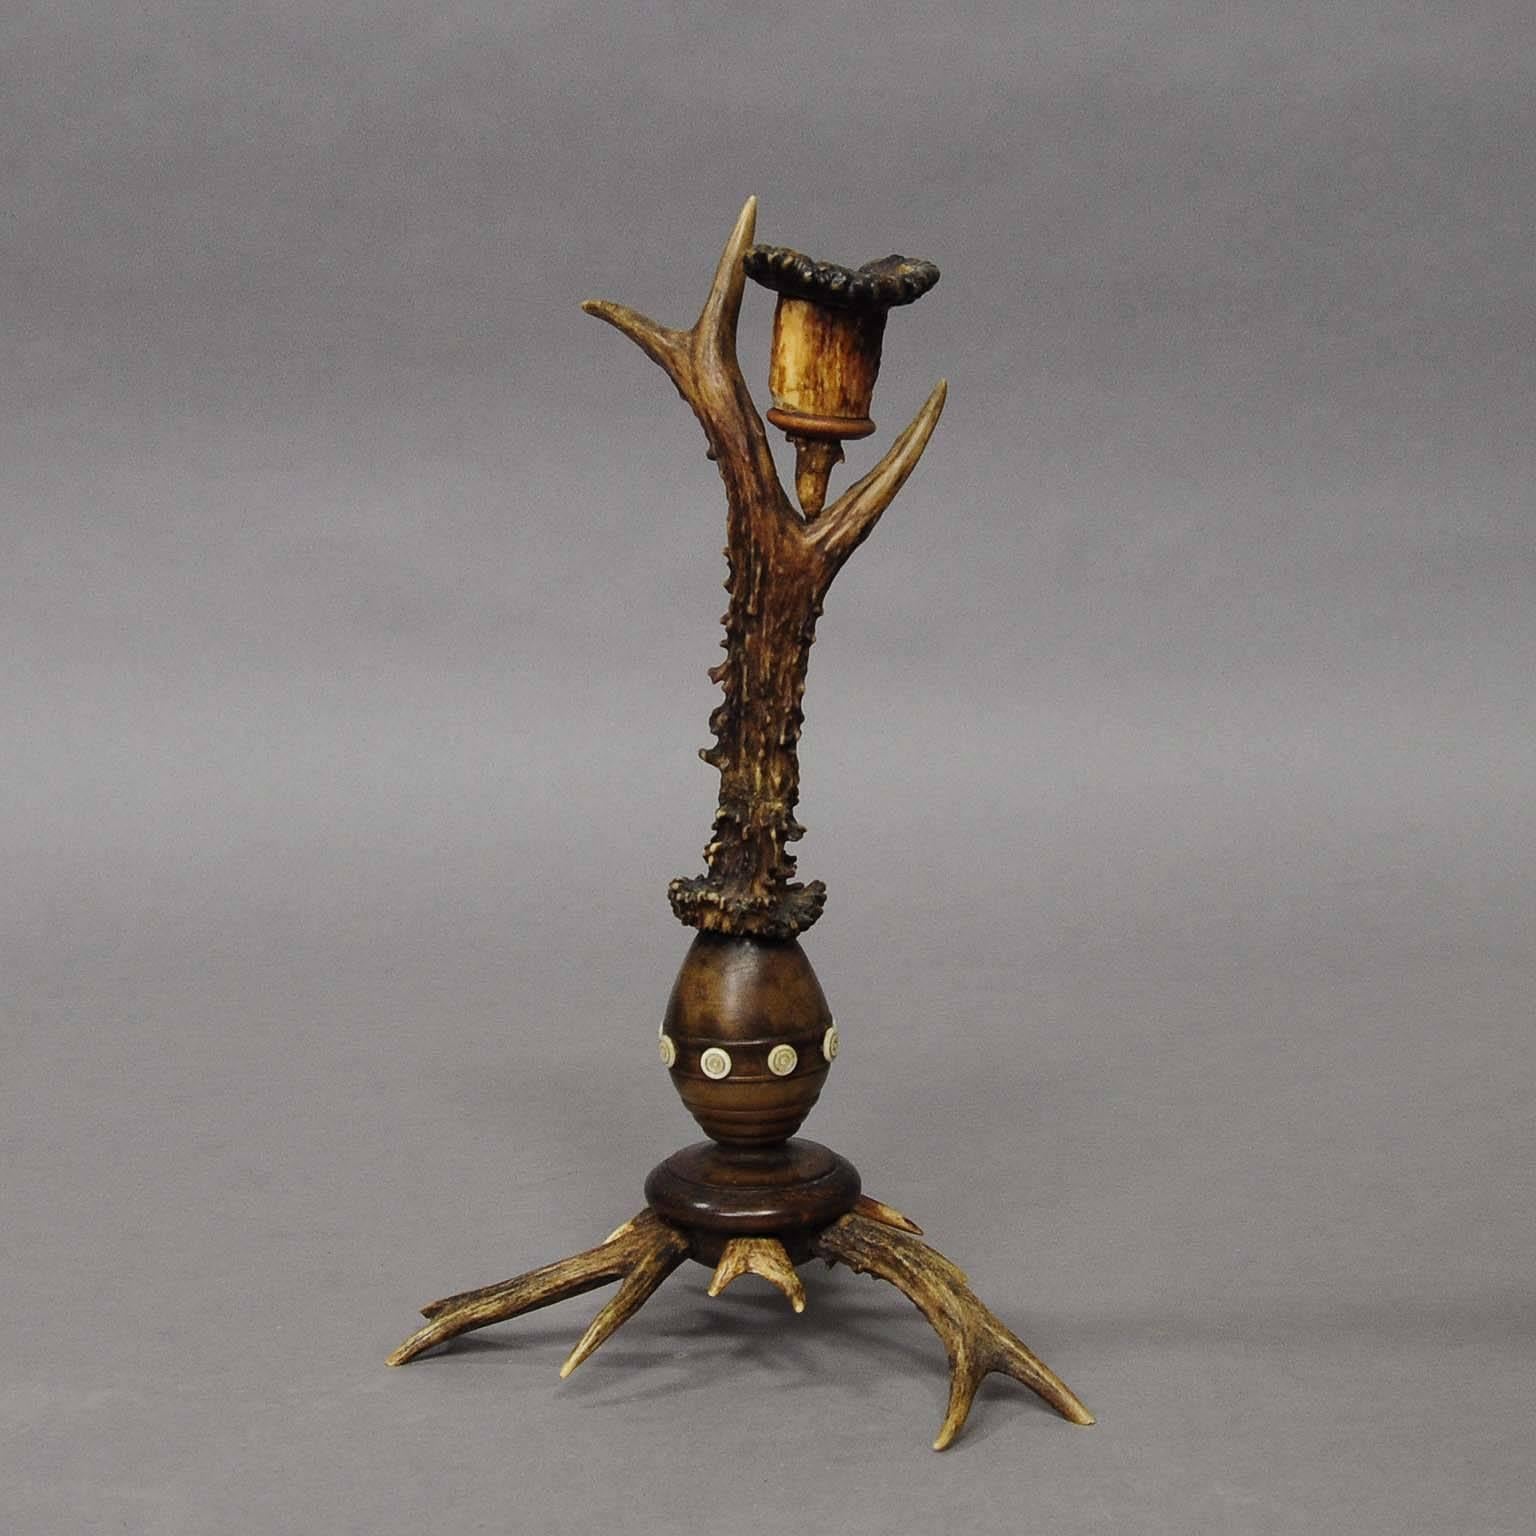 A fashionable rustic candleholder, made of horns from the deer and wood. Spout made of turned antler pieces. Executed in Germany, circa 1900.

Measures: height 12.99